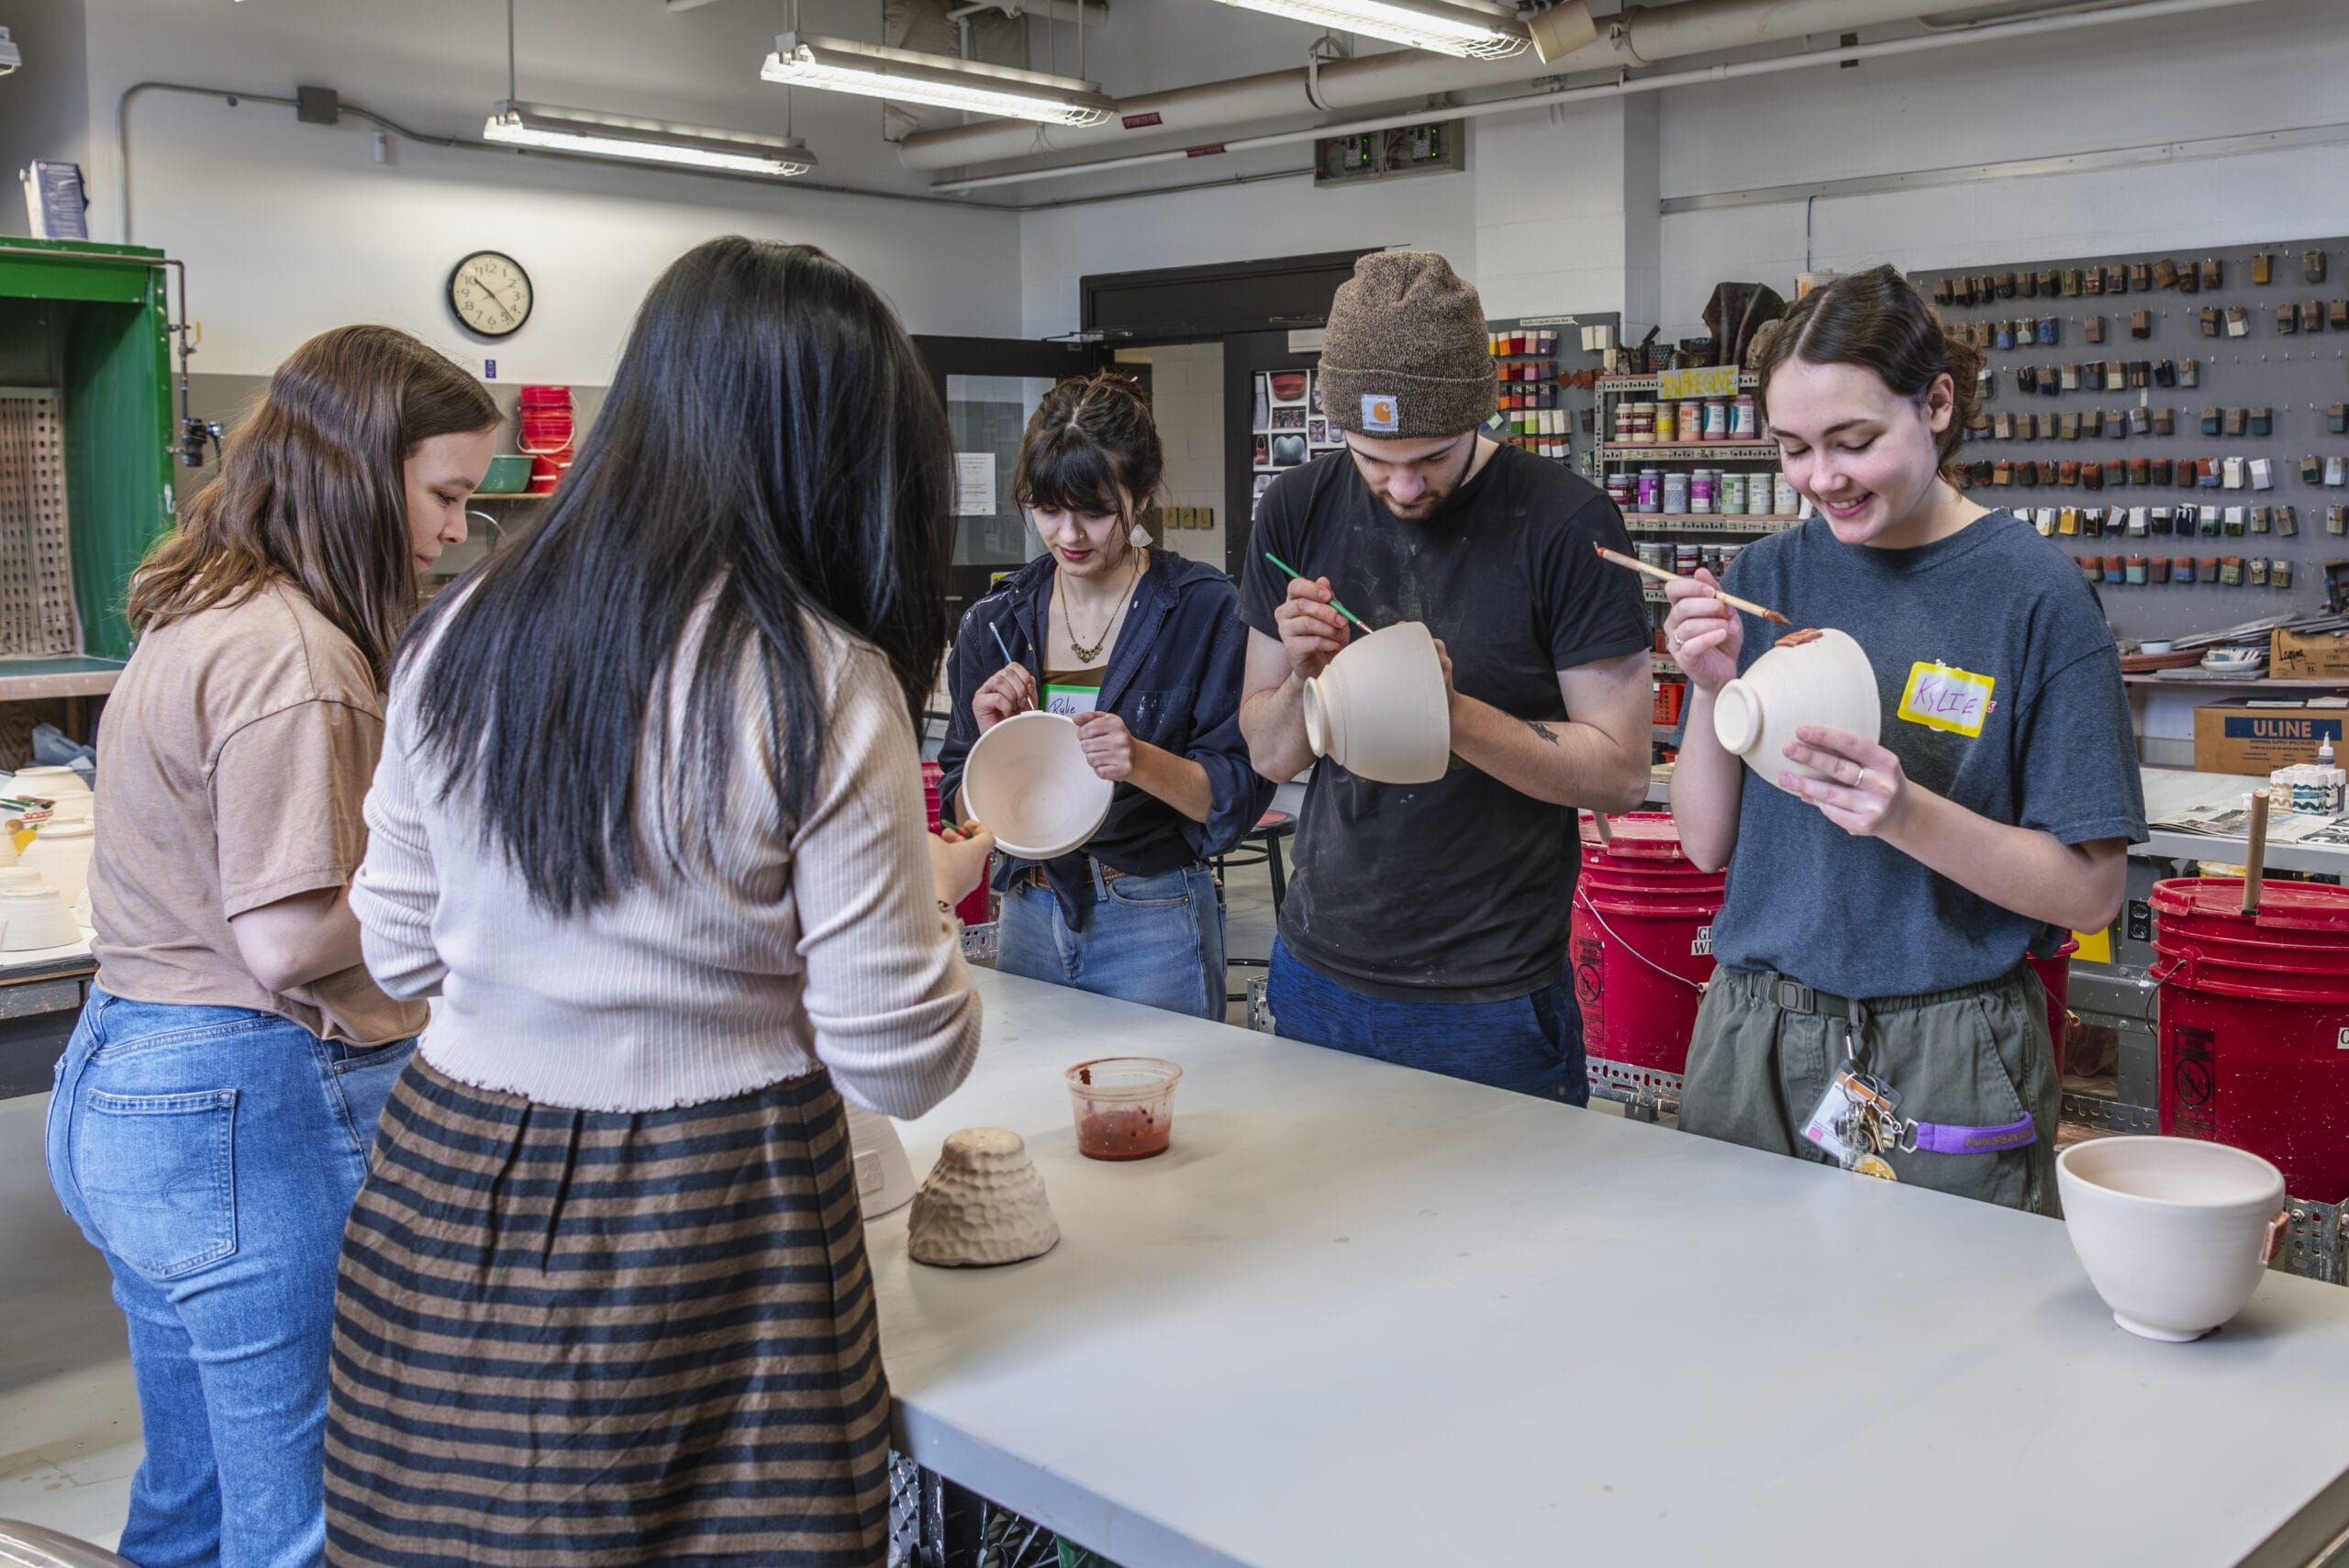 People standing around painting pottery bowls with glaze.